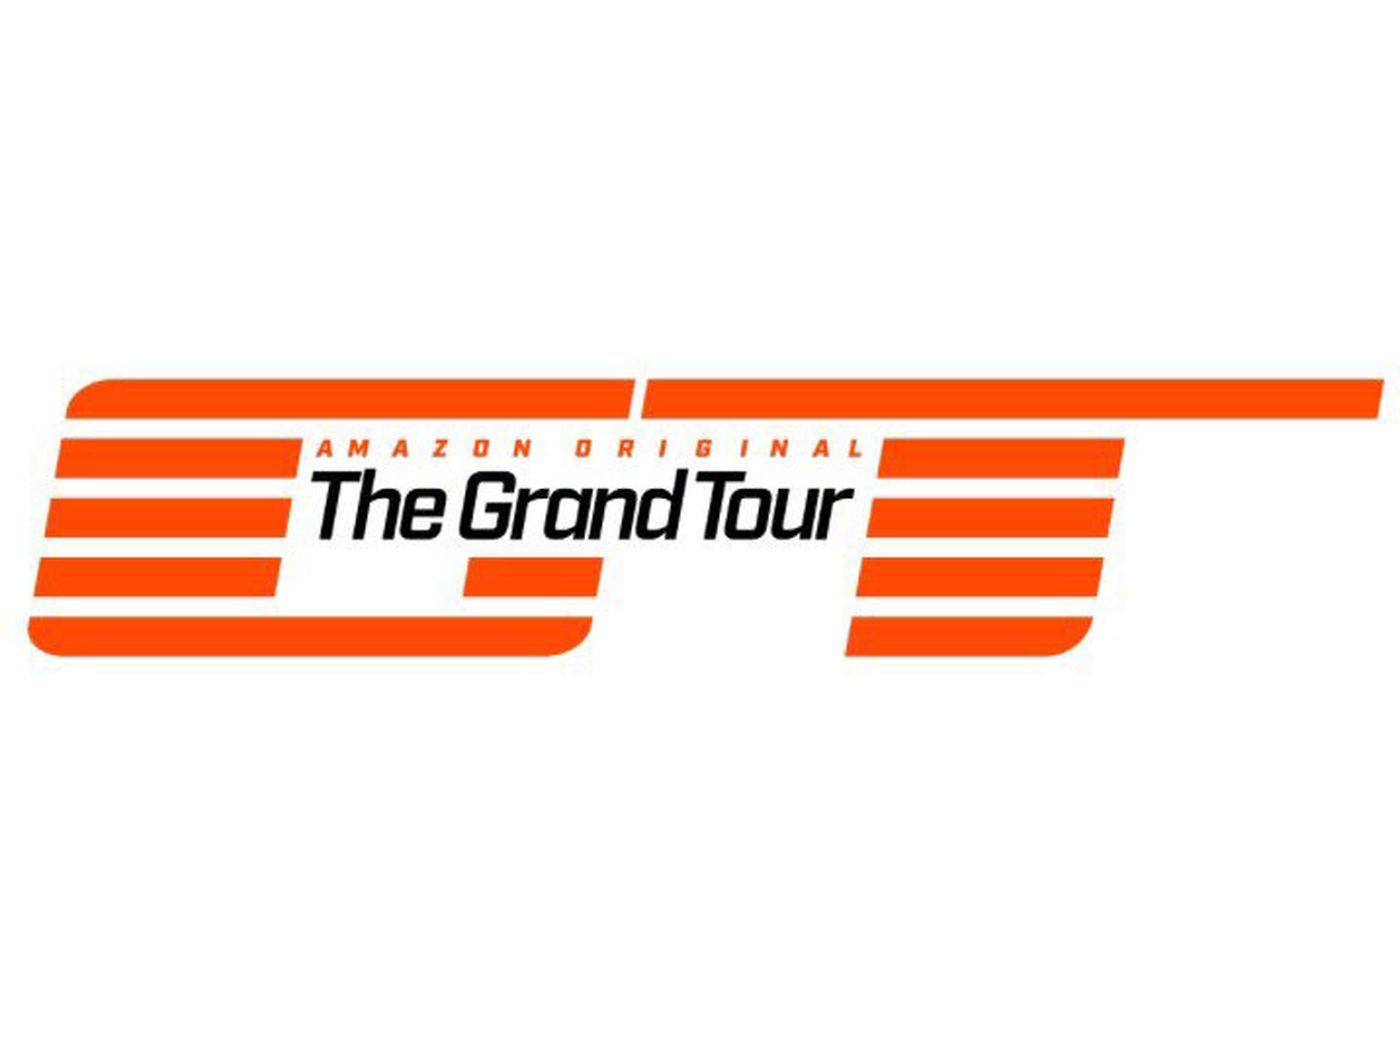 Jeremy Clarkson unveils the logo for The Grand Tour, the old Top